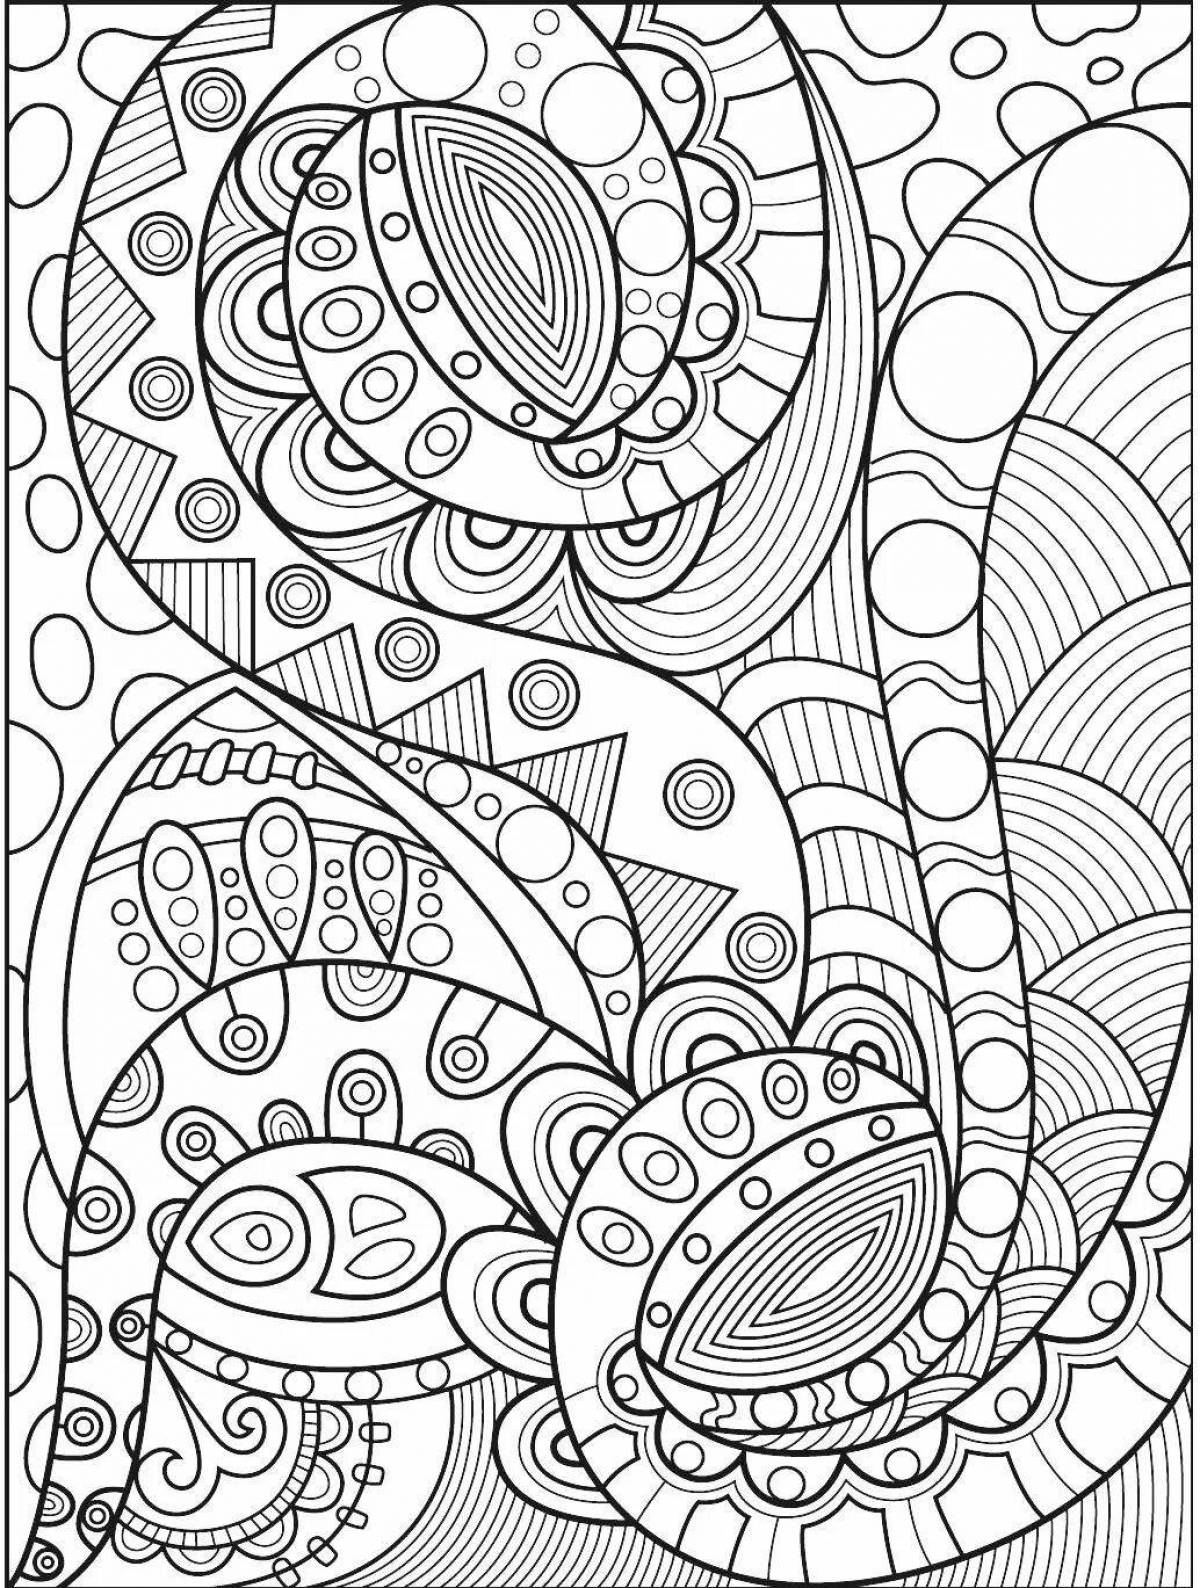 Coloring book charming anti-stress lines